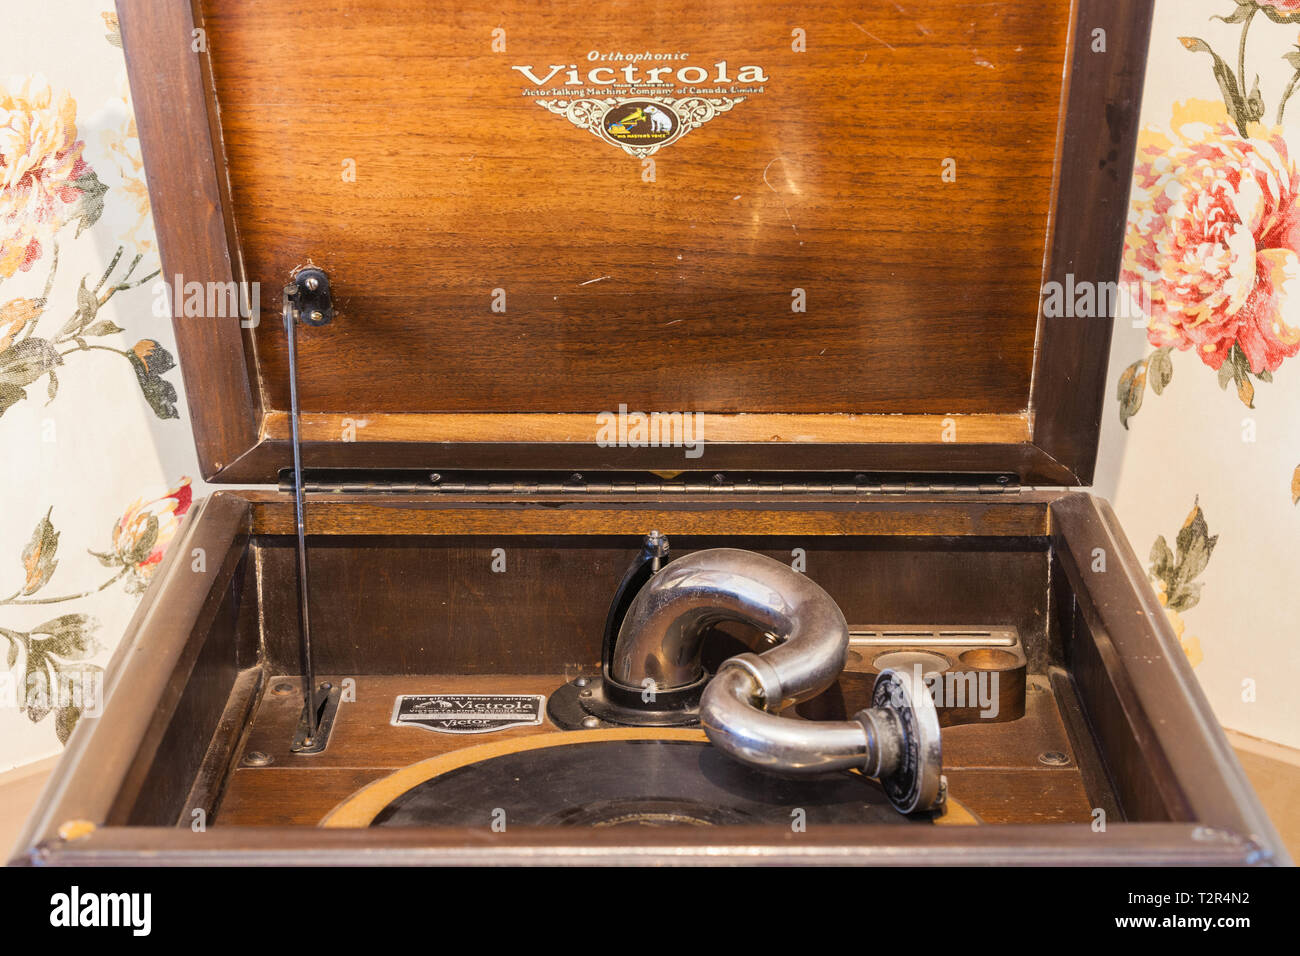 Antique Victrola record player Stock Photo